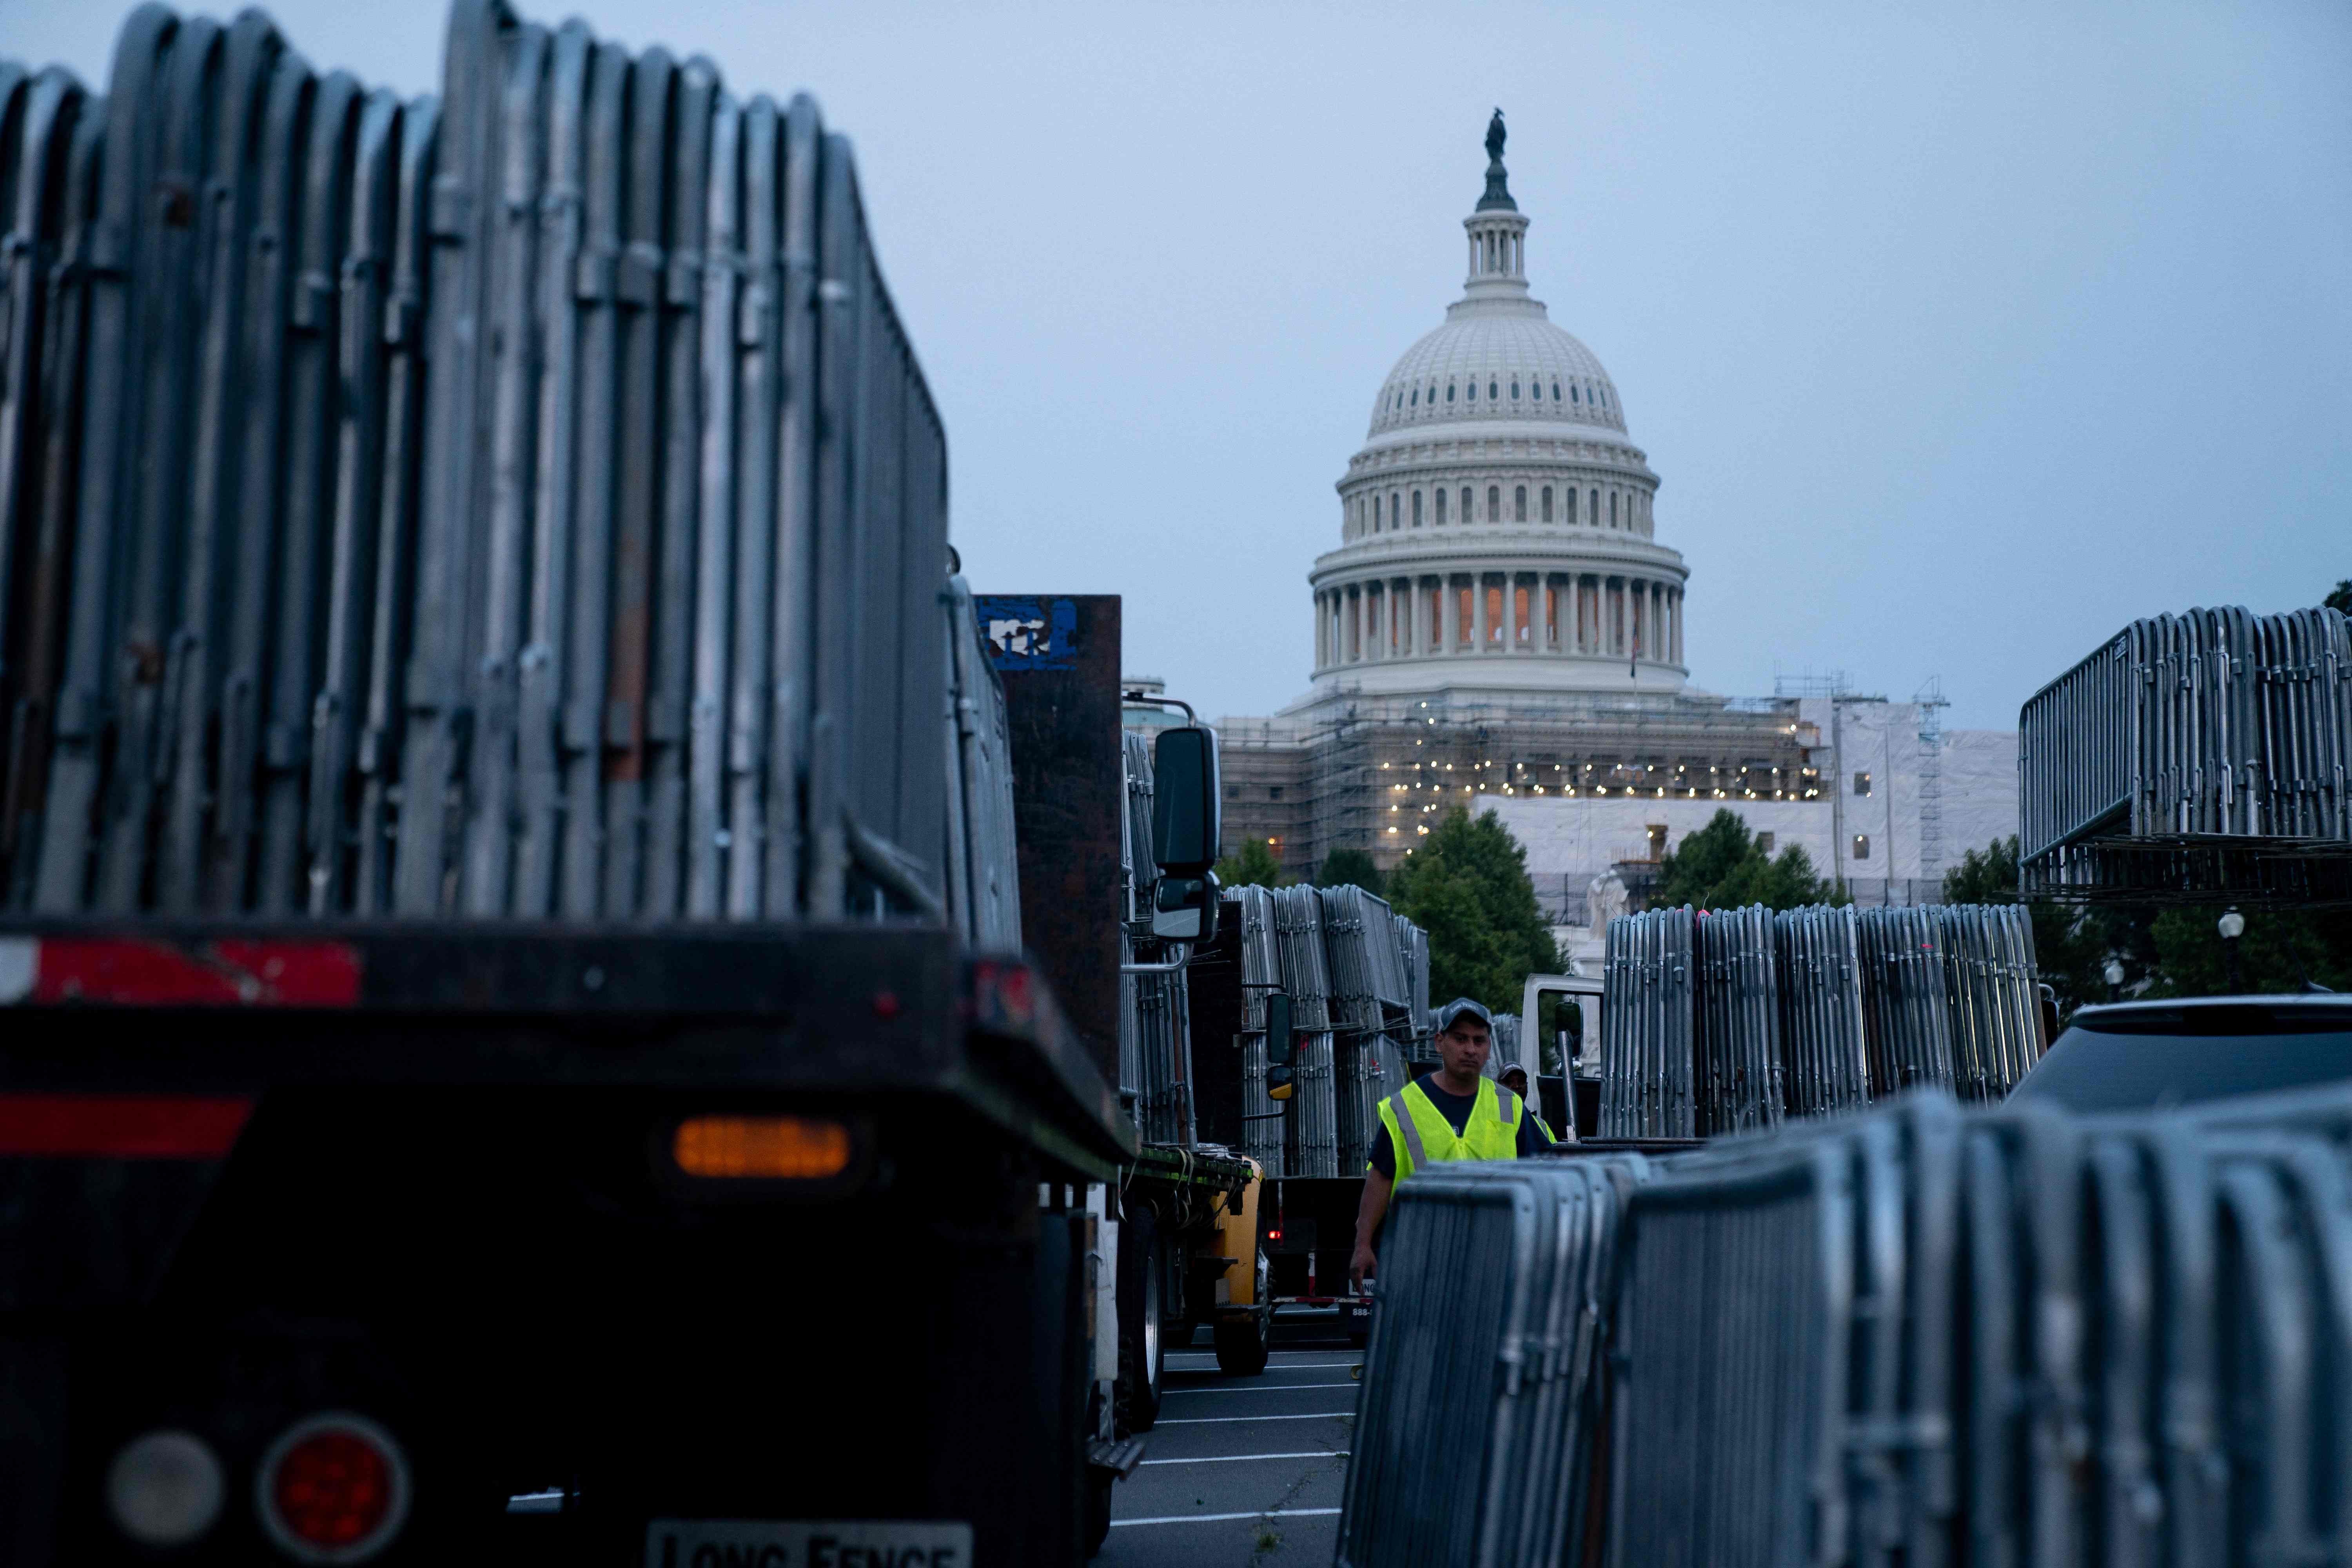 Workers set up security barricades outside the US Capitol in Washington, DC